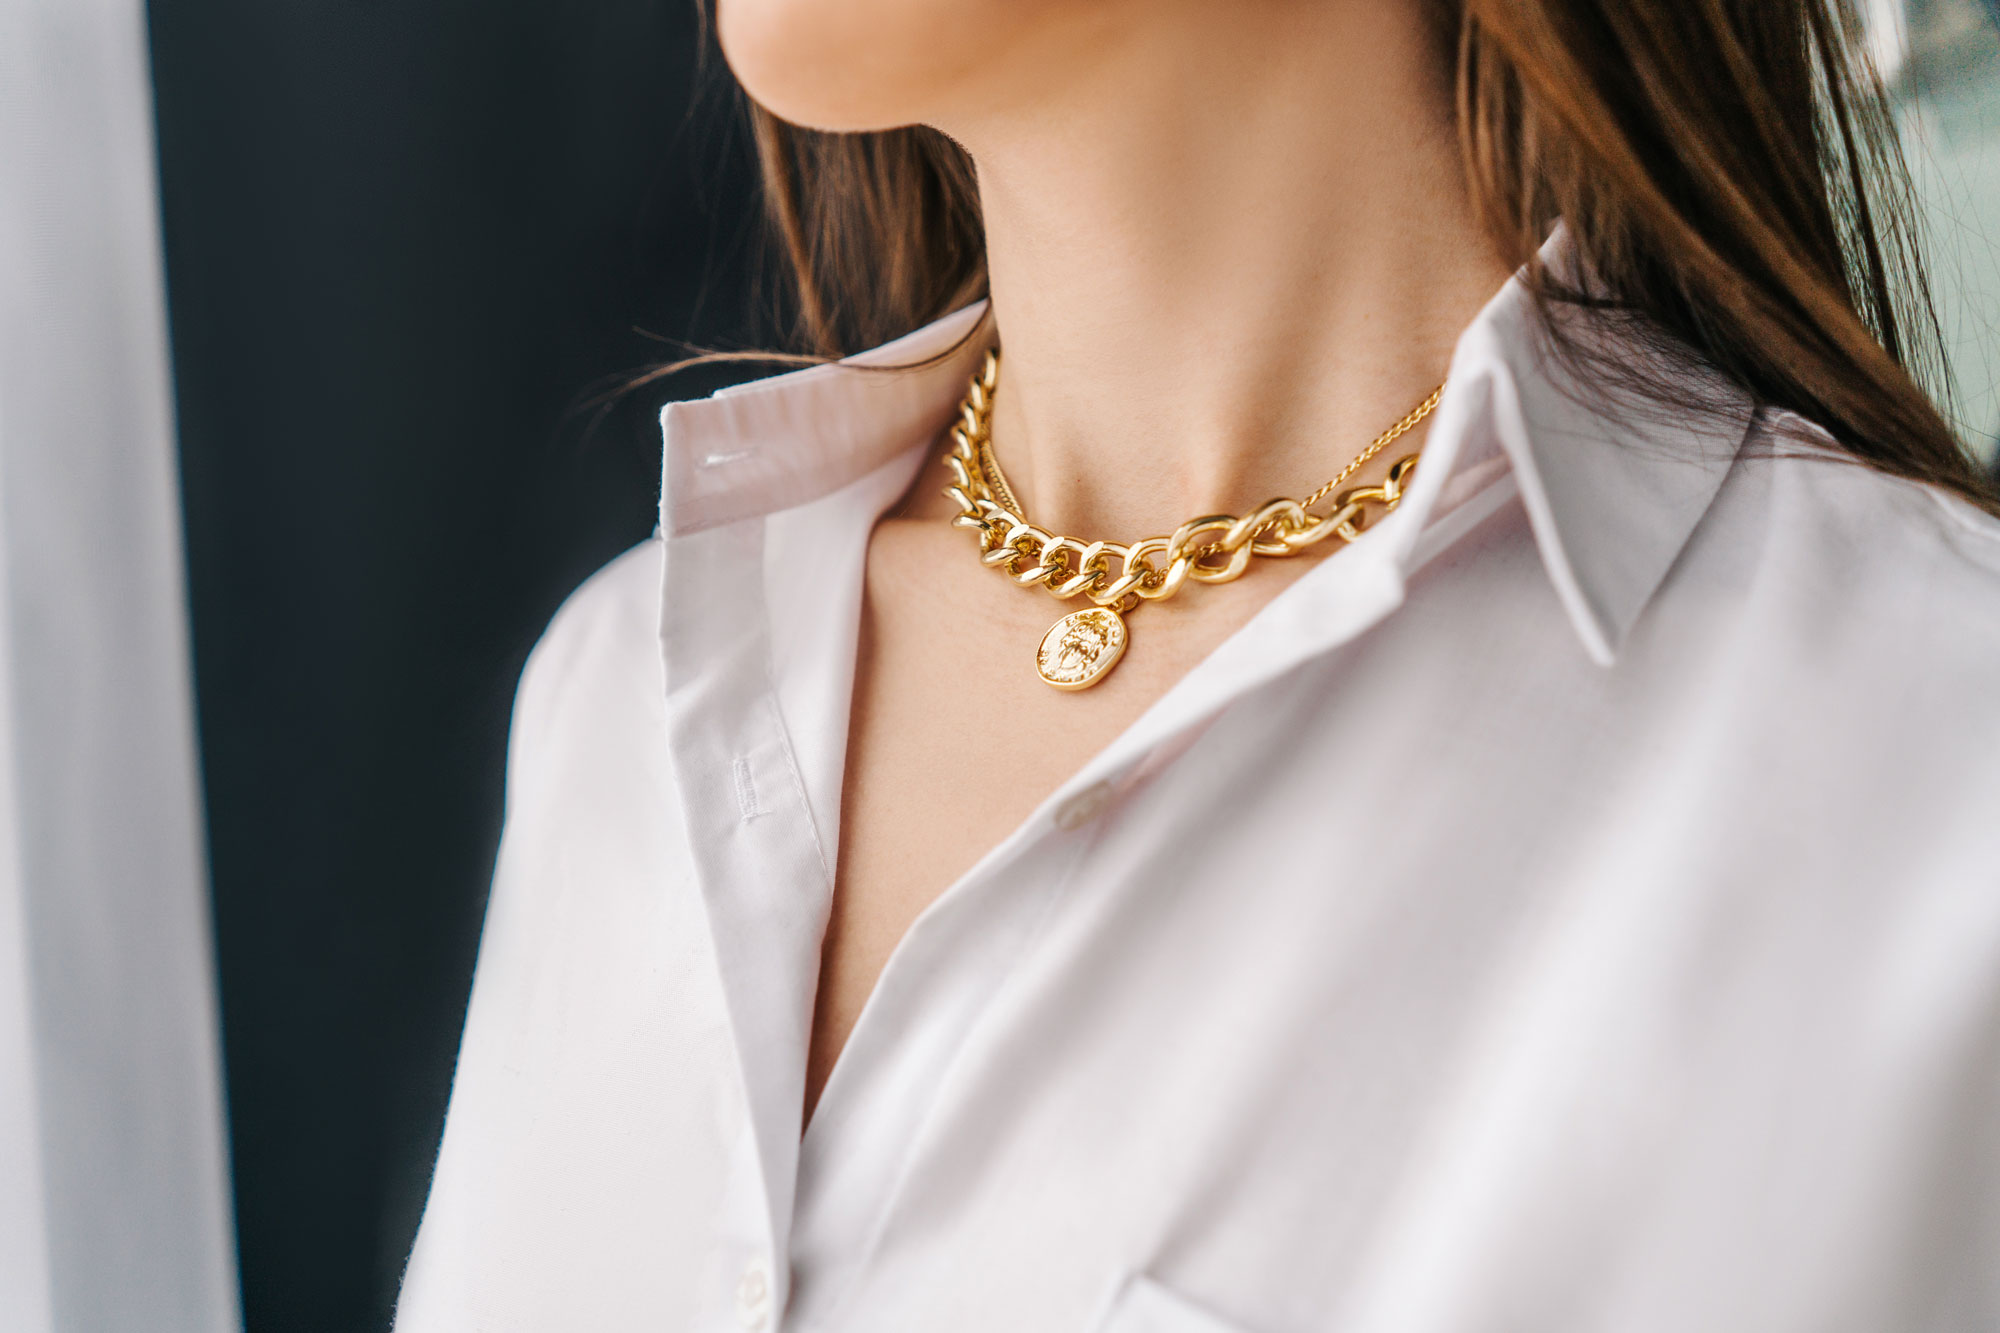 Close up of woman in a white shirt with gold chain necklaces.